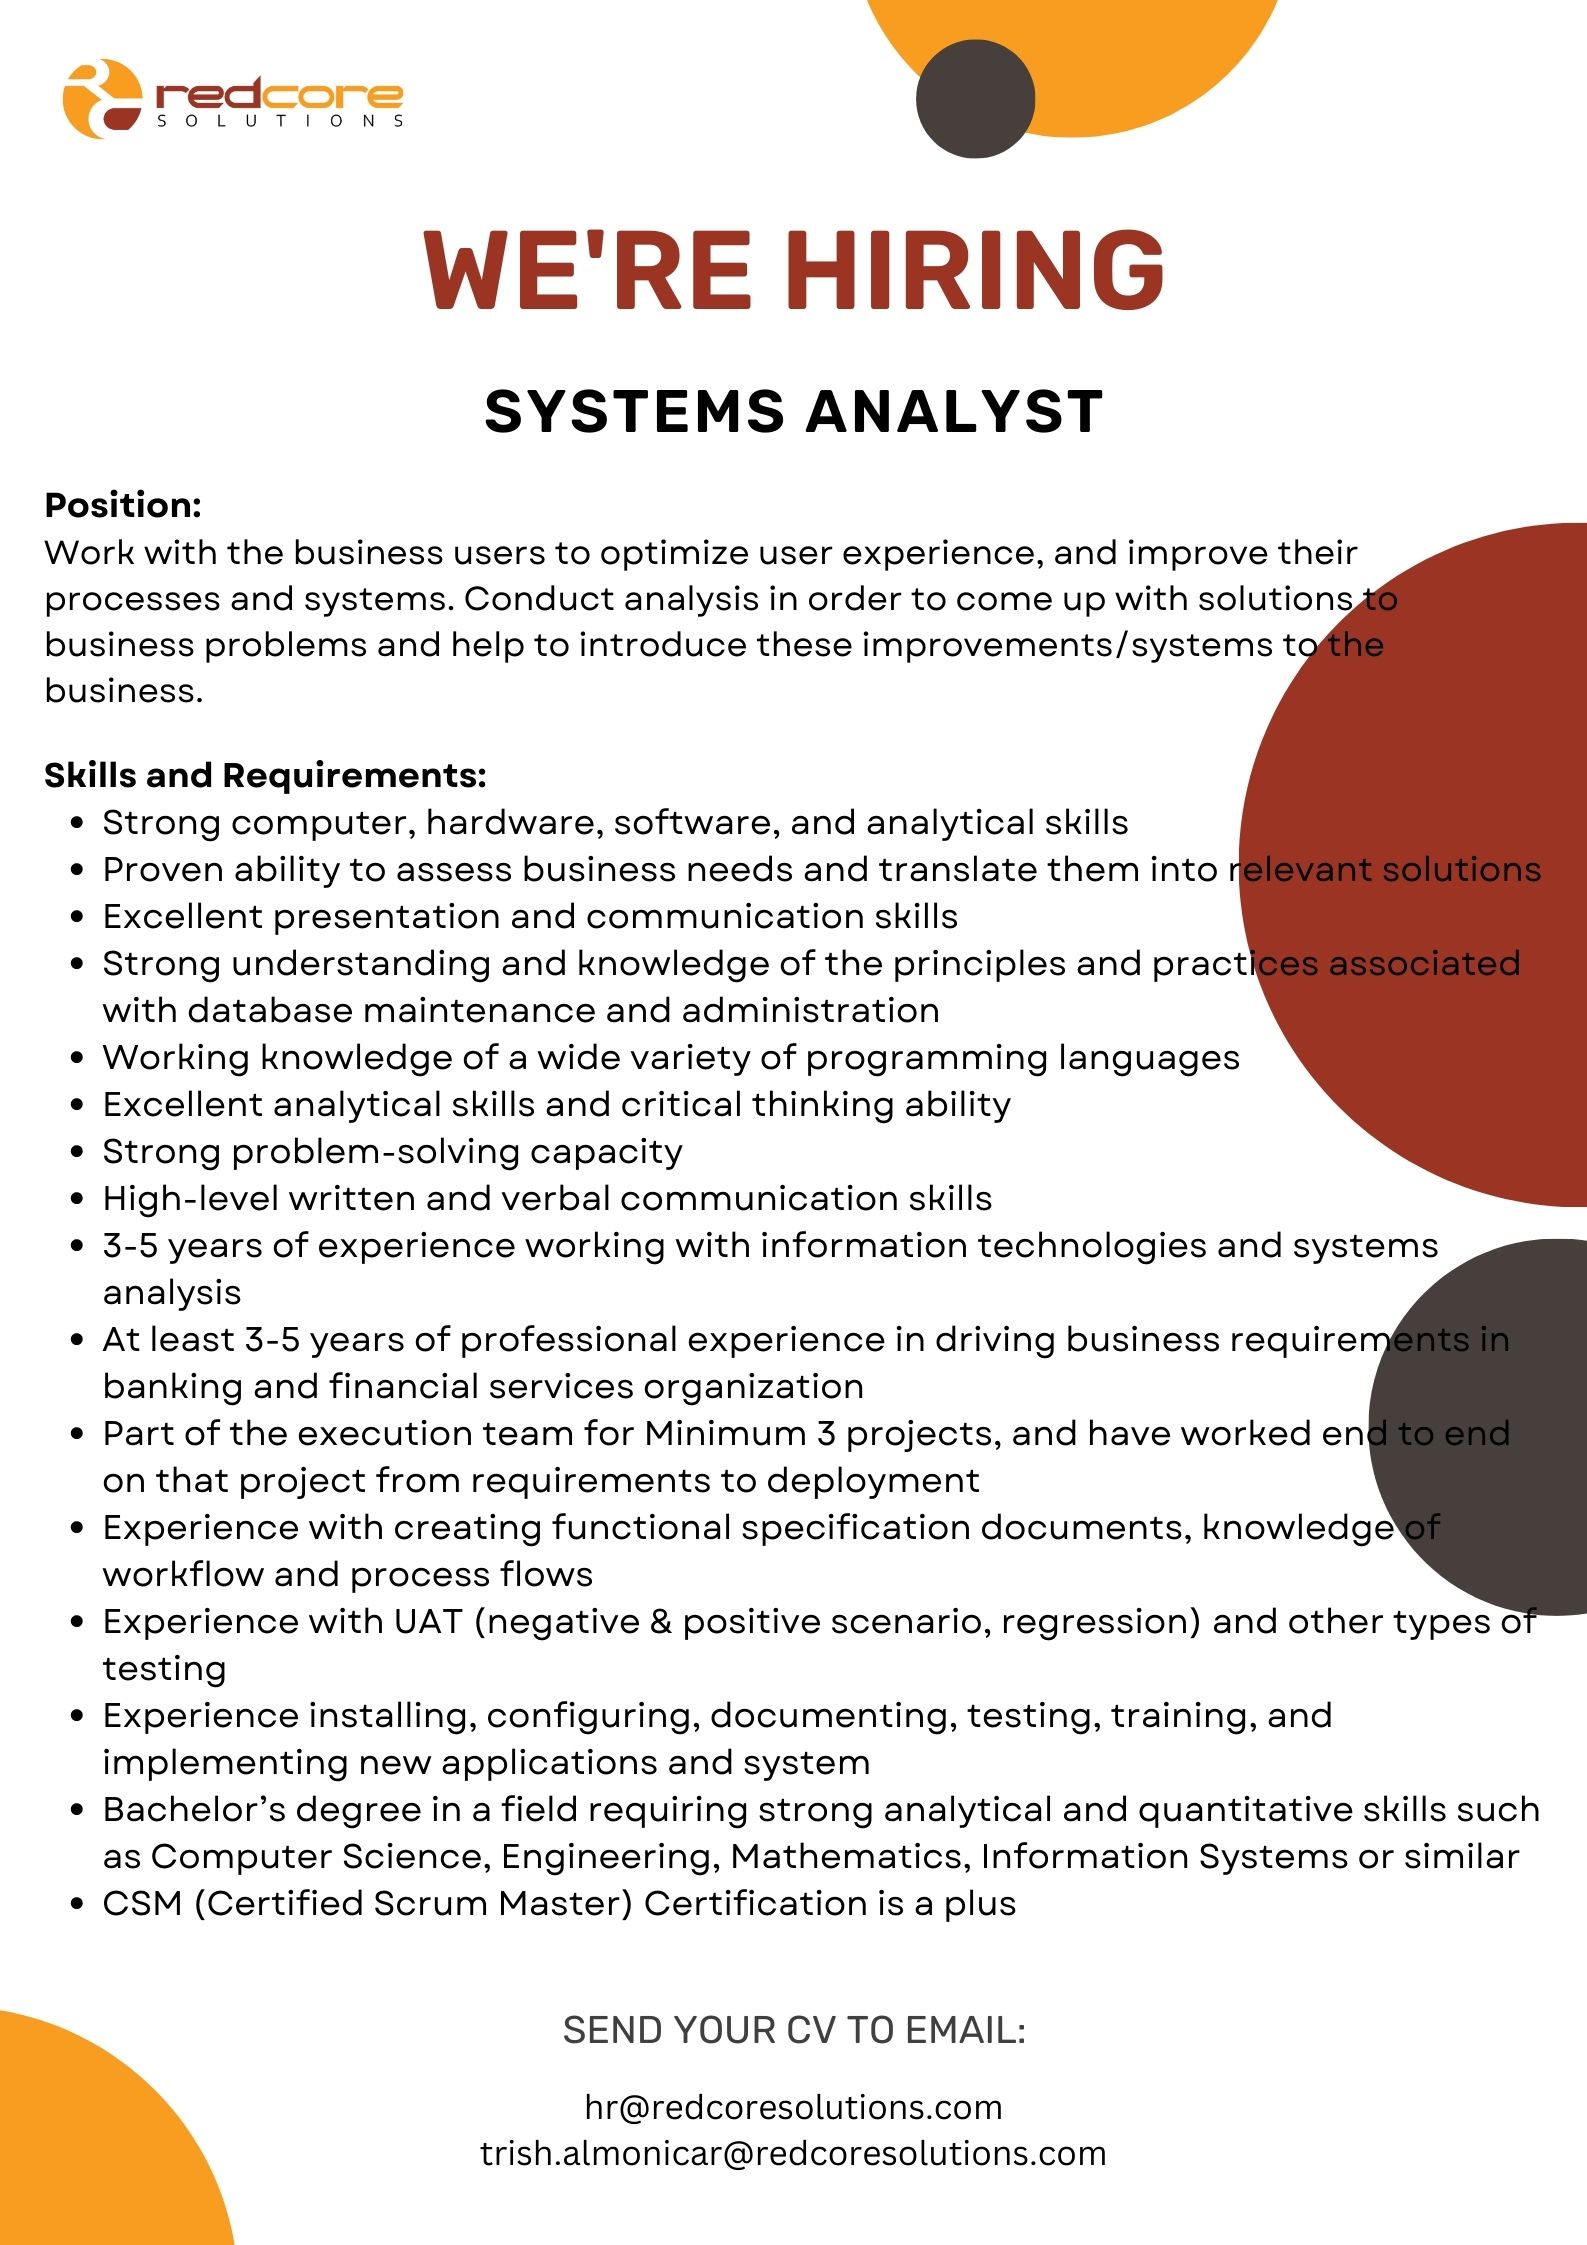 We’re Hiring! System Analyst